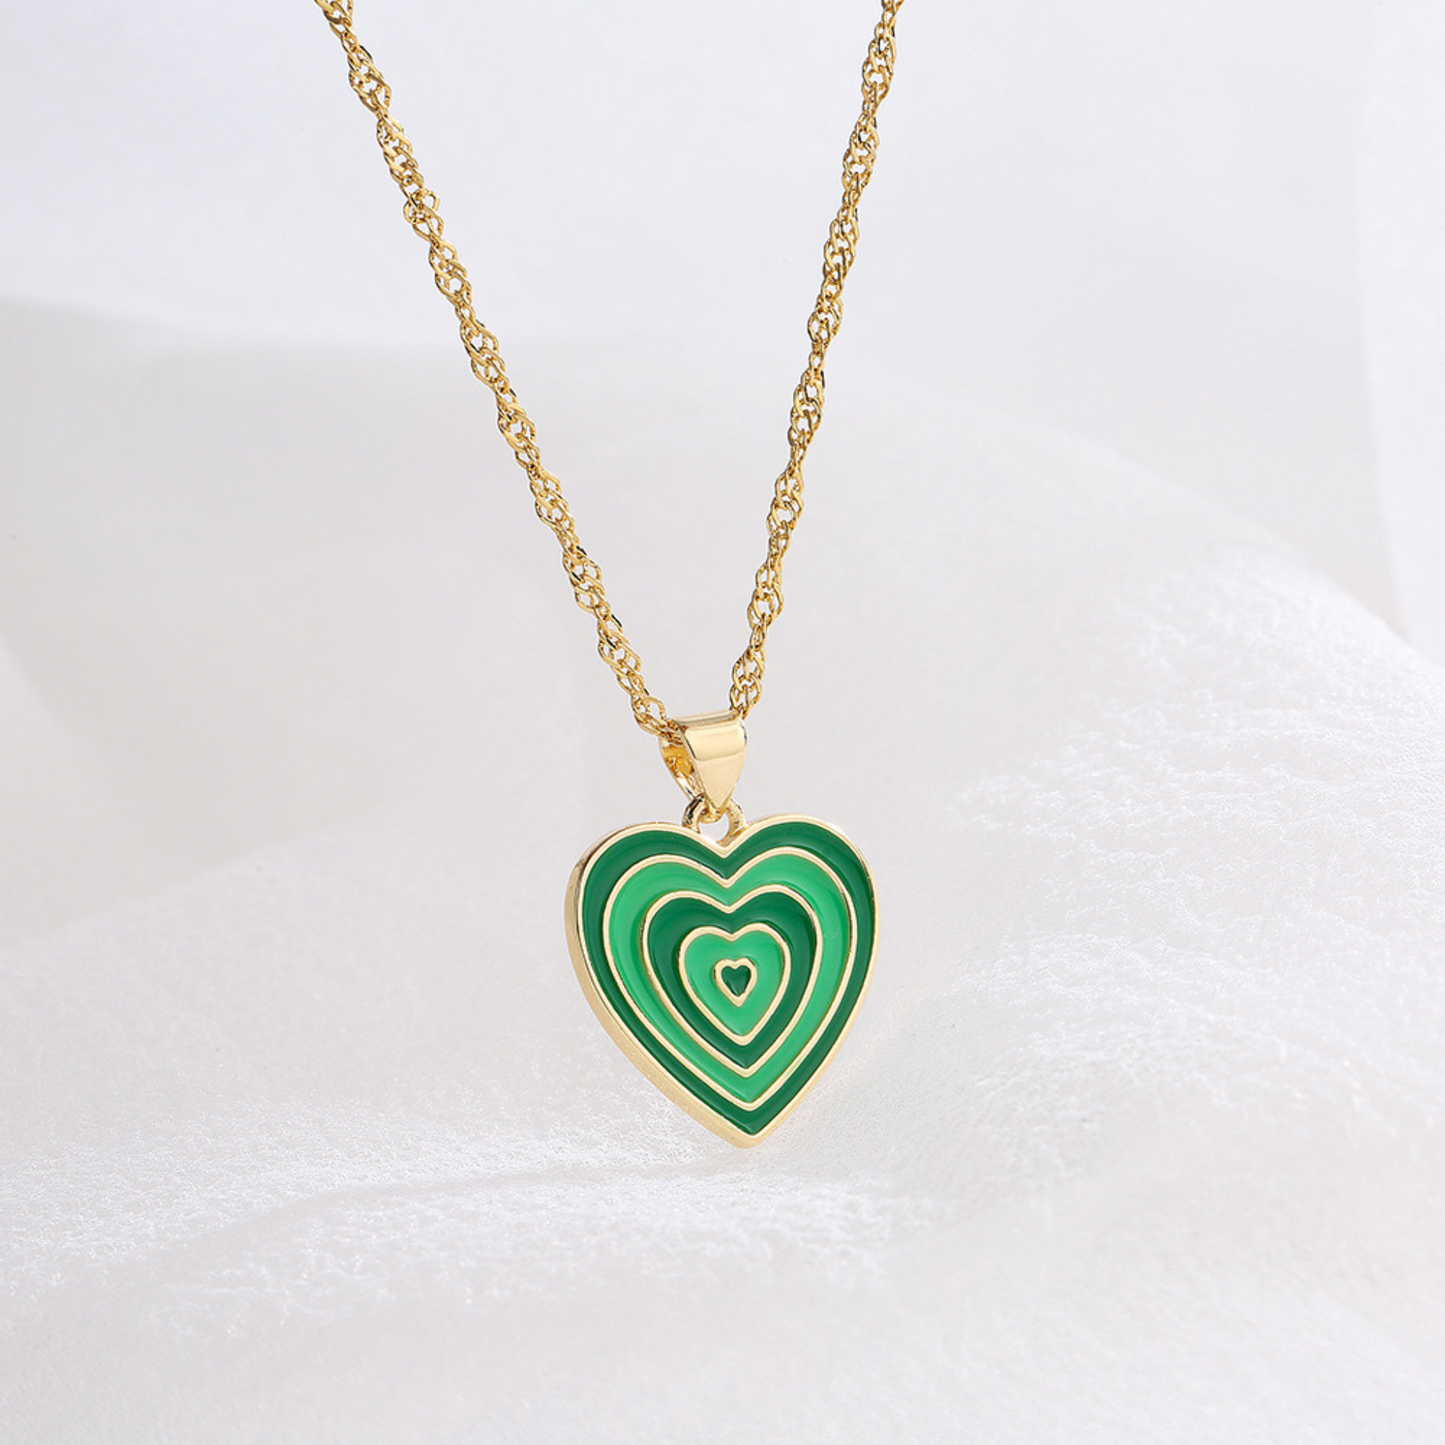 Colorful Heart Pendant Necklace for Women